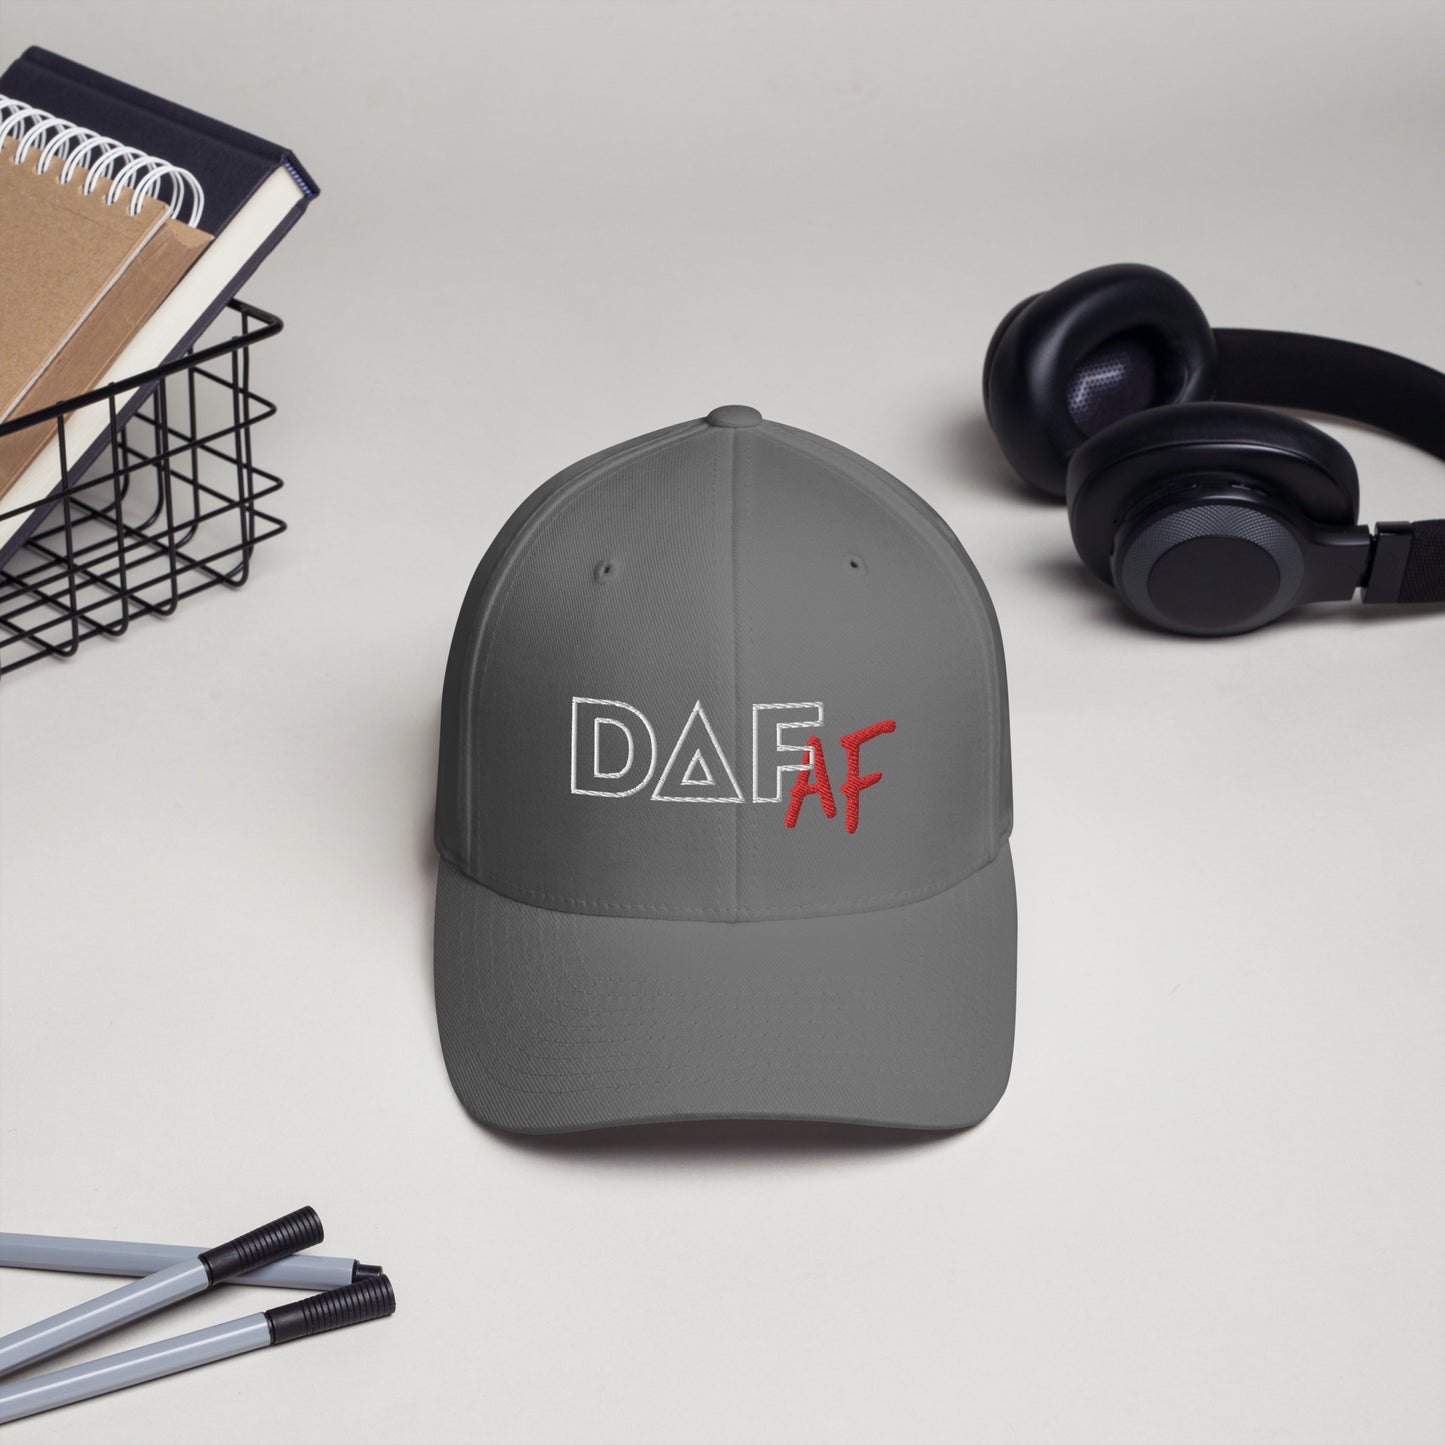 Drug & Alcohol Free (DAF) as F*%k - Fitted Hat